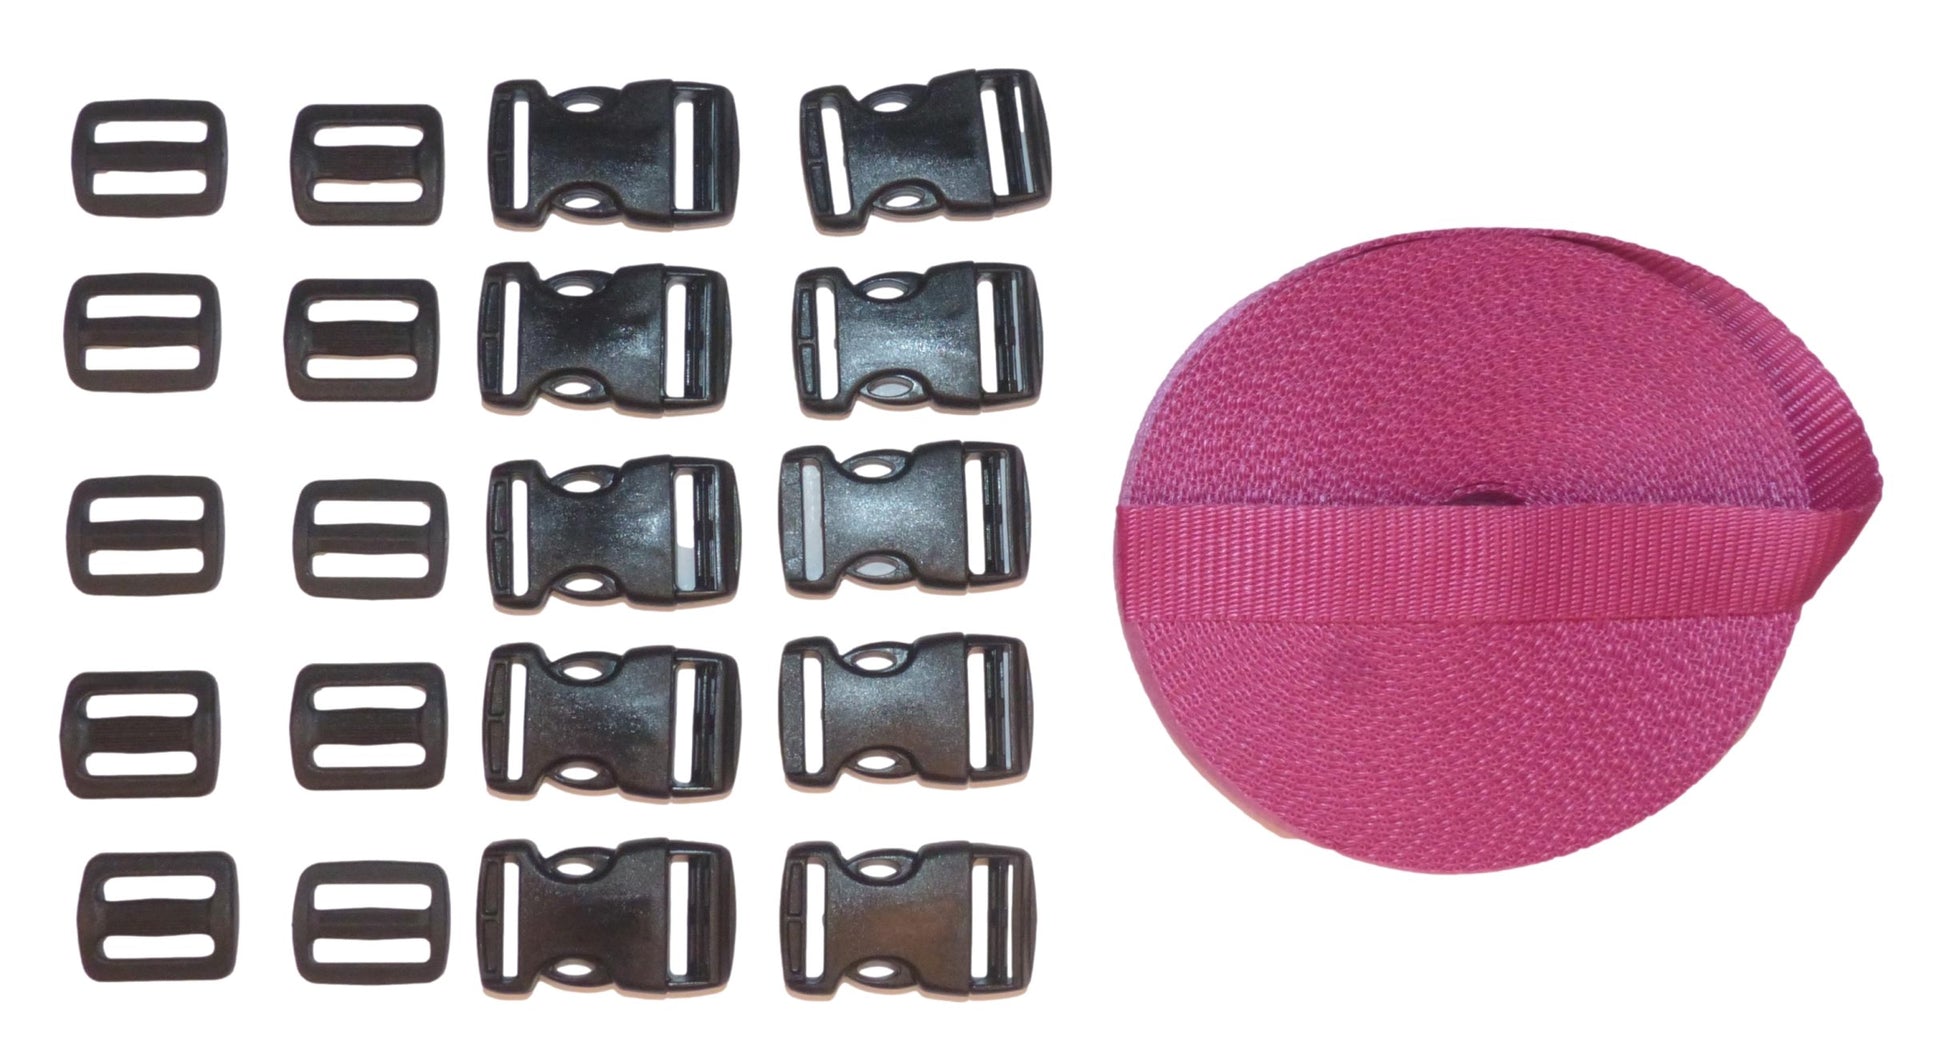 Benristraps 25mm Heavy-Duty Webbing and Branded  Buckle Sets for Straps, Bags, Crafts in pink